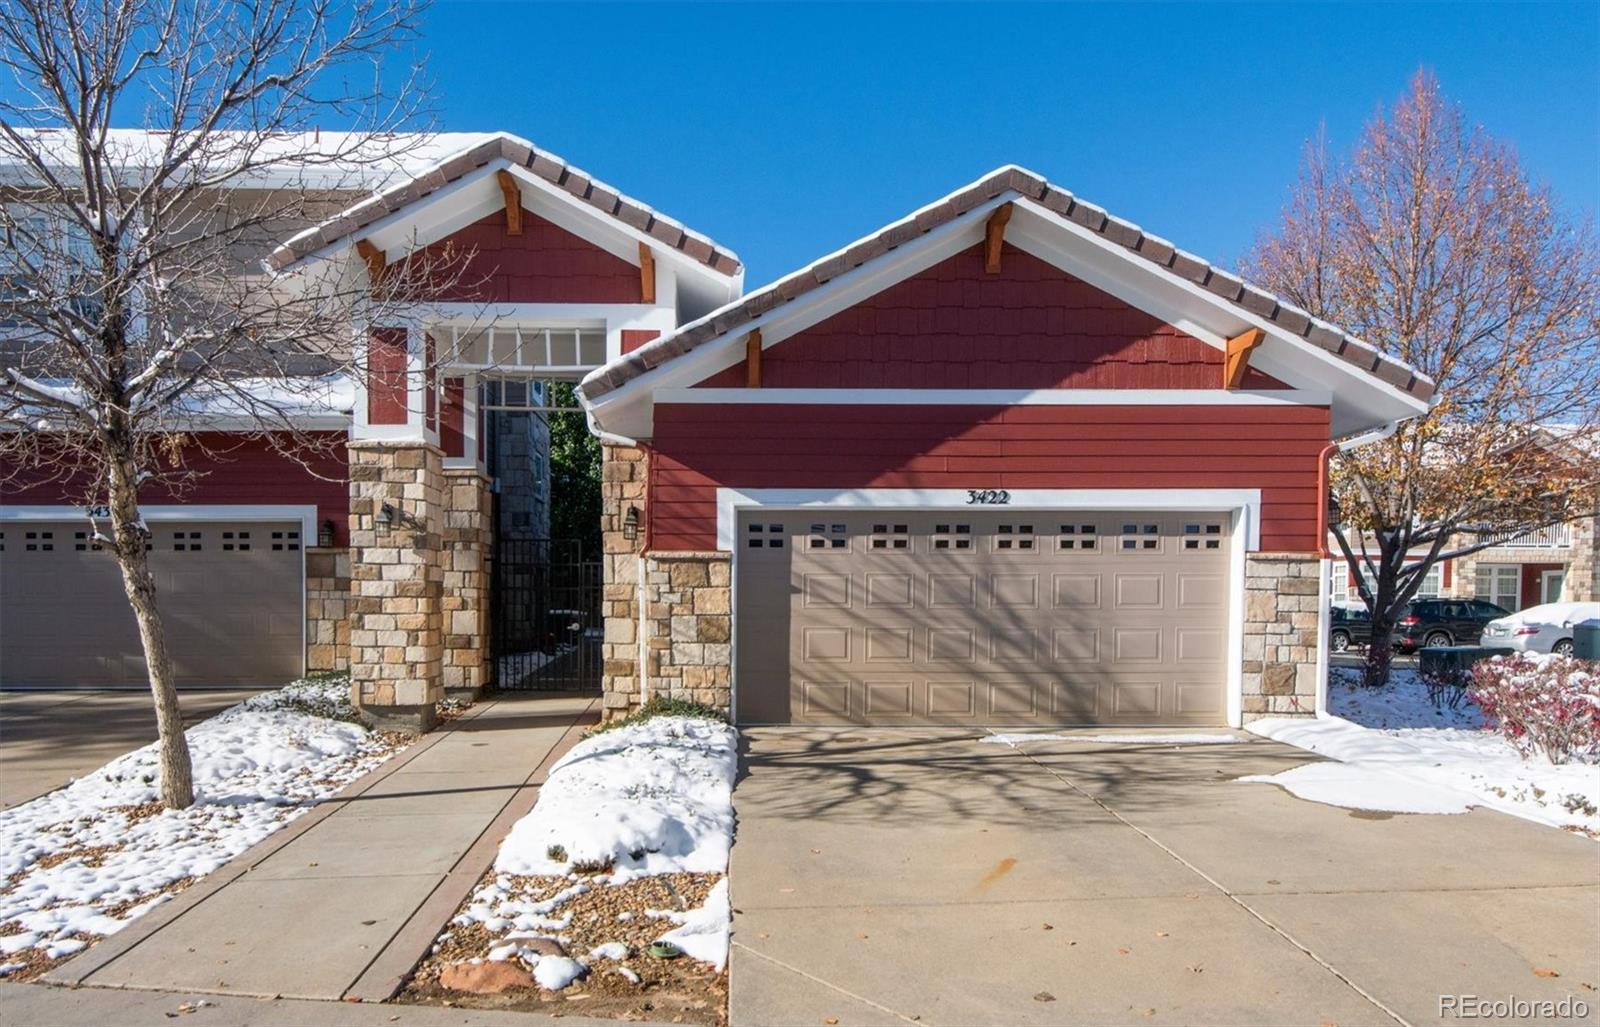 3422  molly lane, Broomfield sold home. Closed on 2023-12-29 for $380,000.